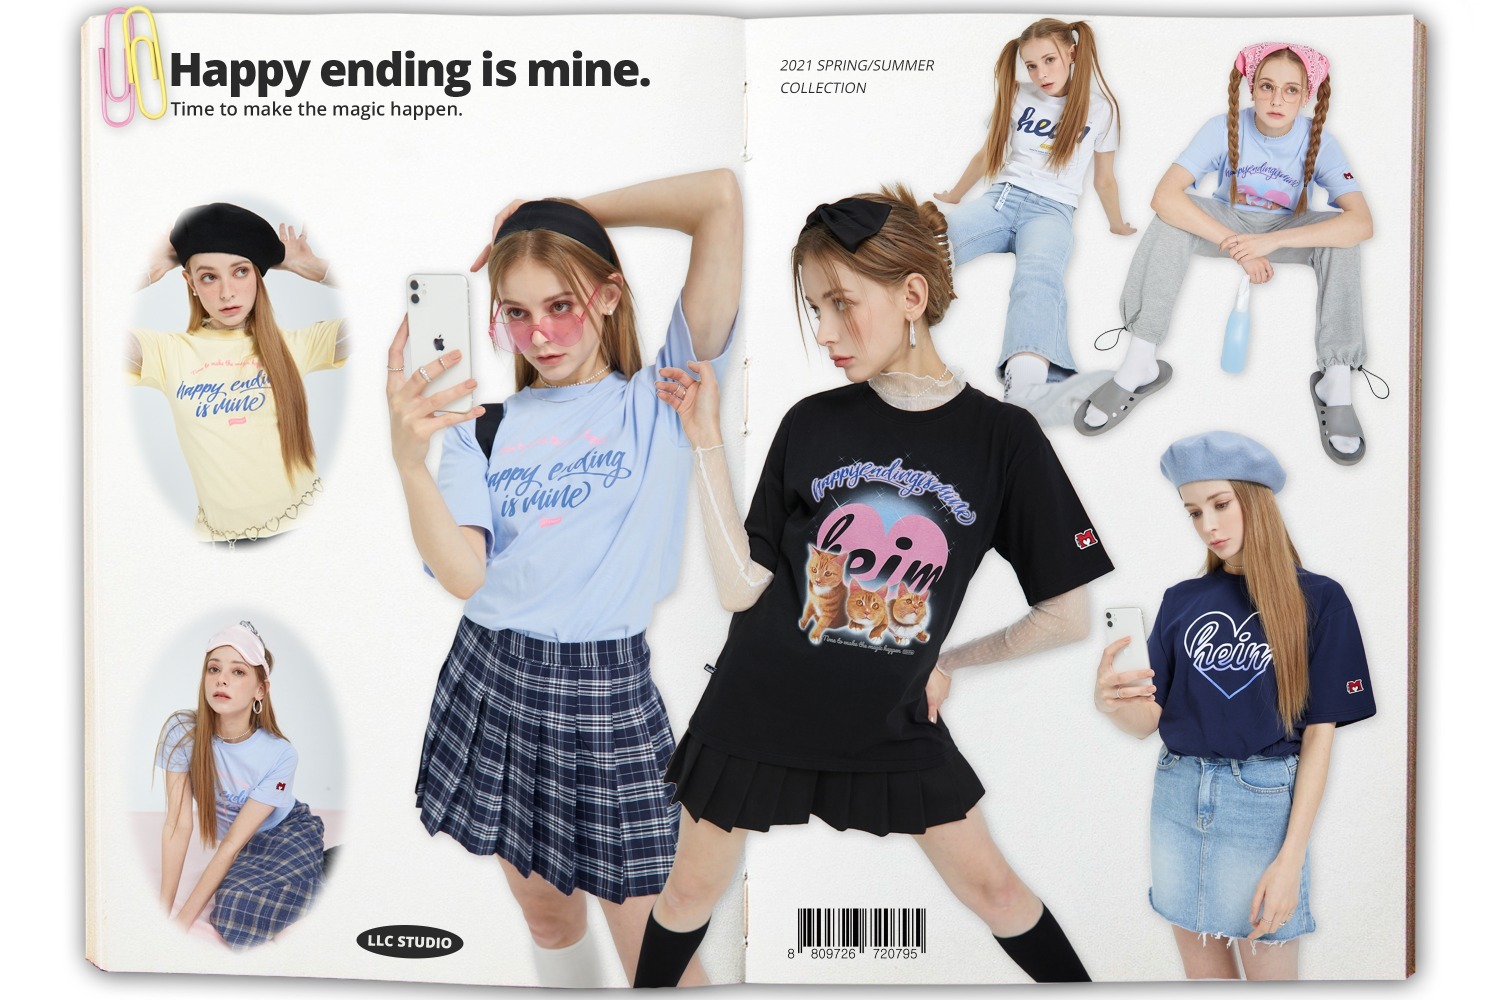 Happy ending is mine 2021 SPRING/SUMMER COLLECTION